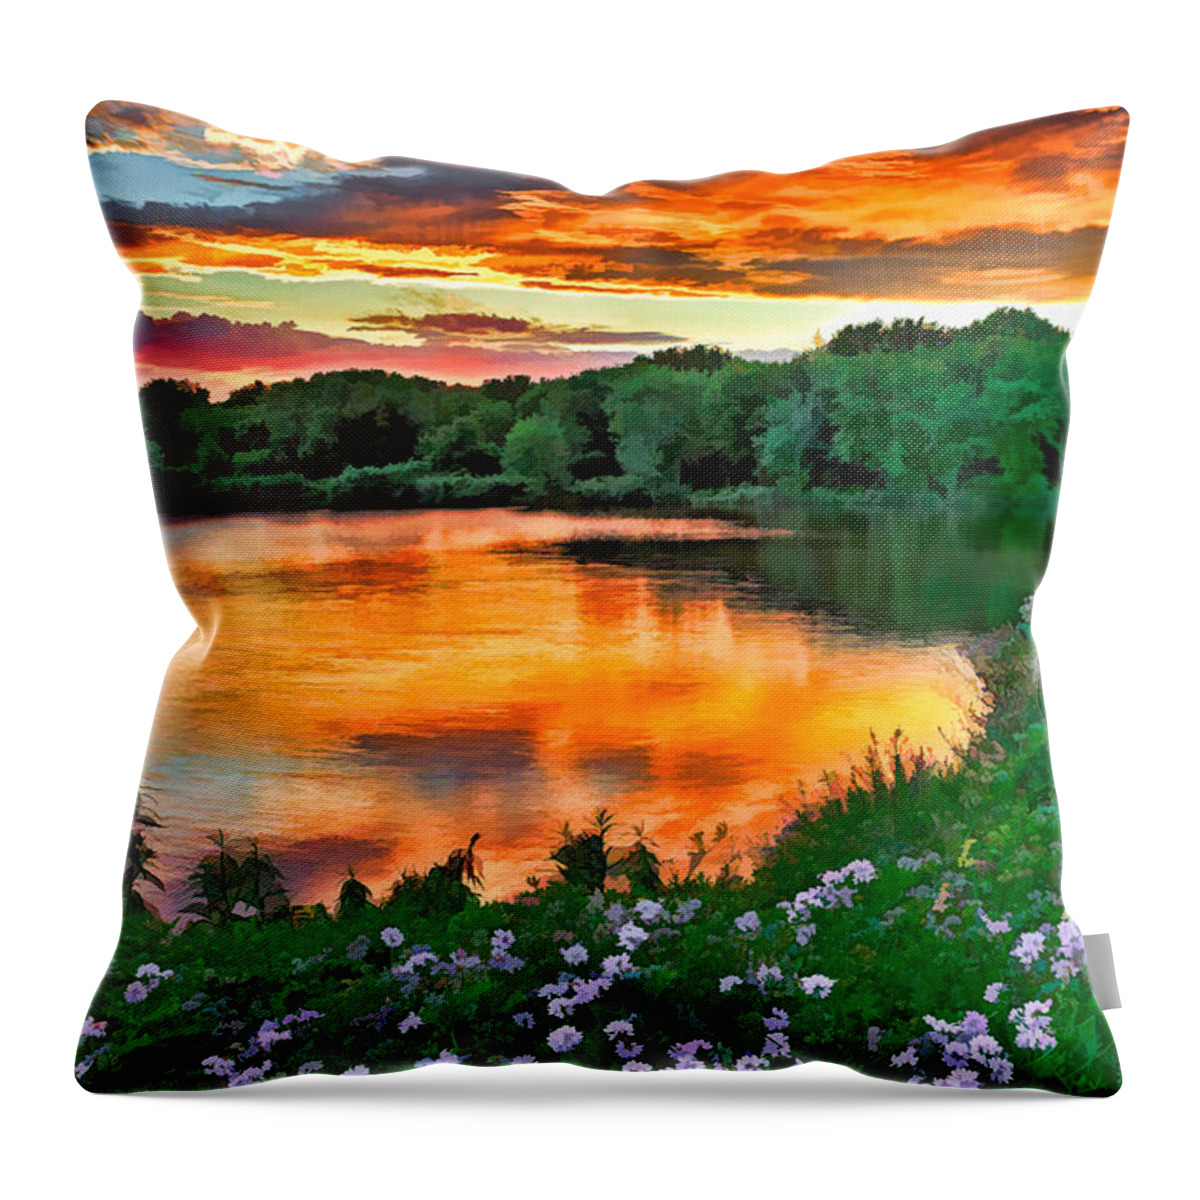 Sunset Throw Pillow featuring the photograph Painted Sunset by William Jobes